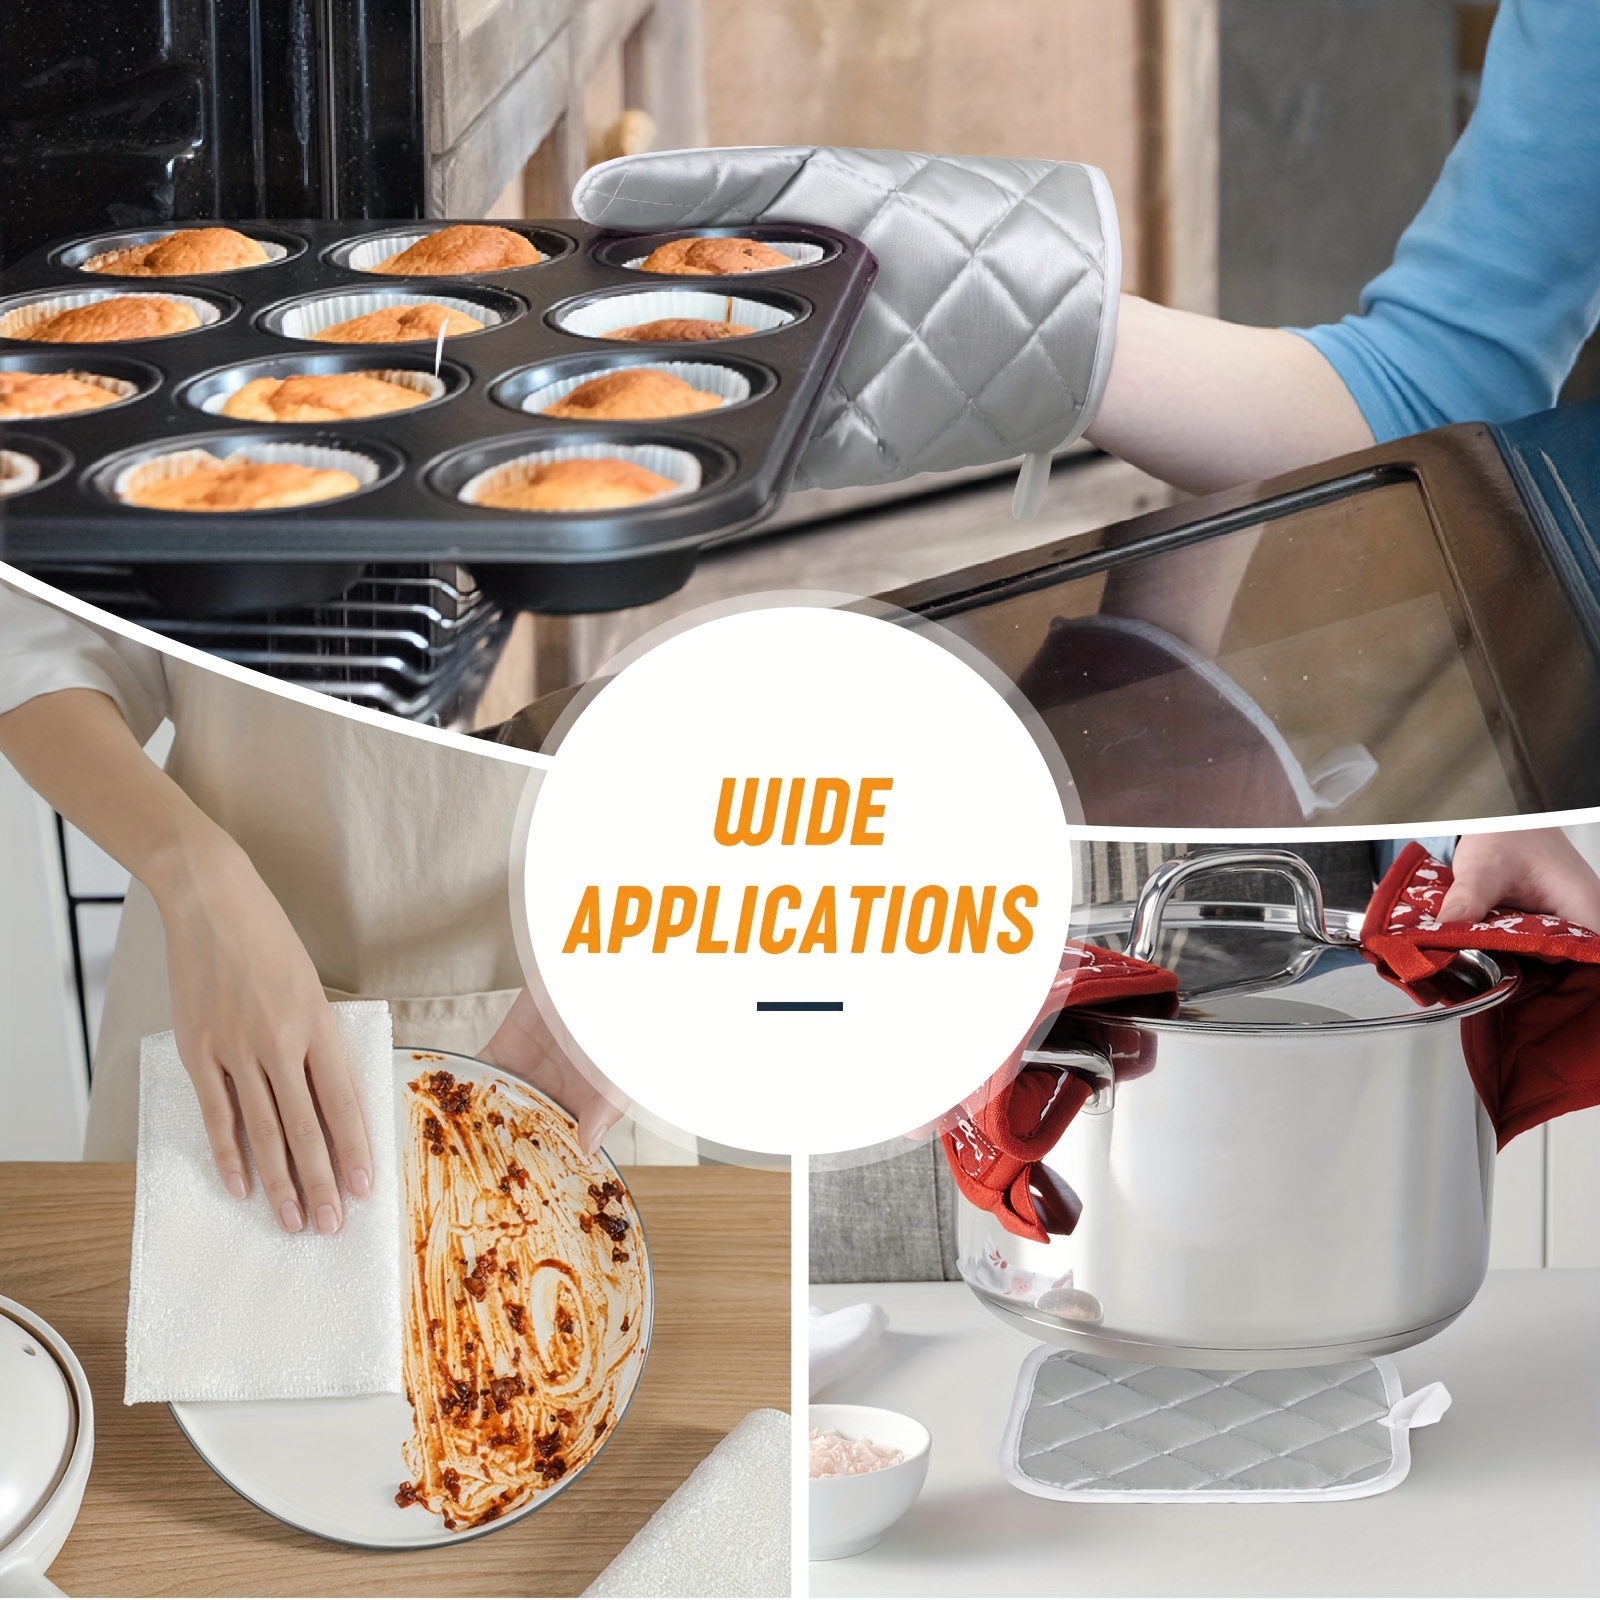 

7 Pcs Blank Sublimation Oven Mitts Set Include Sublimation Heat Resistance Oven Glove And Pot Holders Kitchen Dish Towels With Soft Polyester For Diy Kitchen Room Accessories (white)